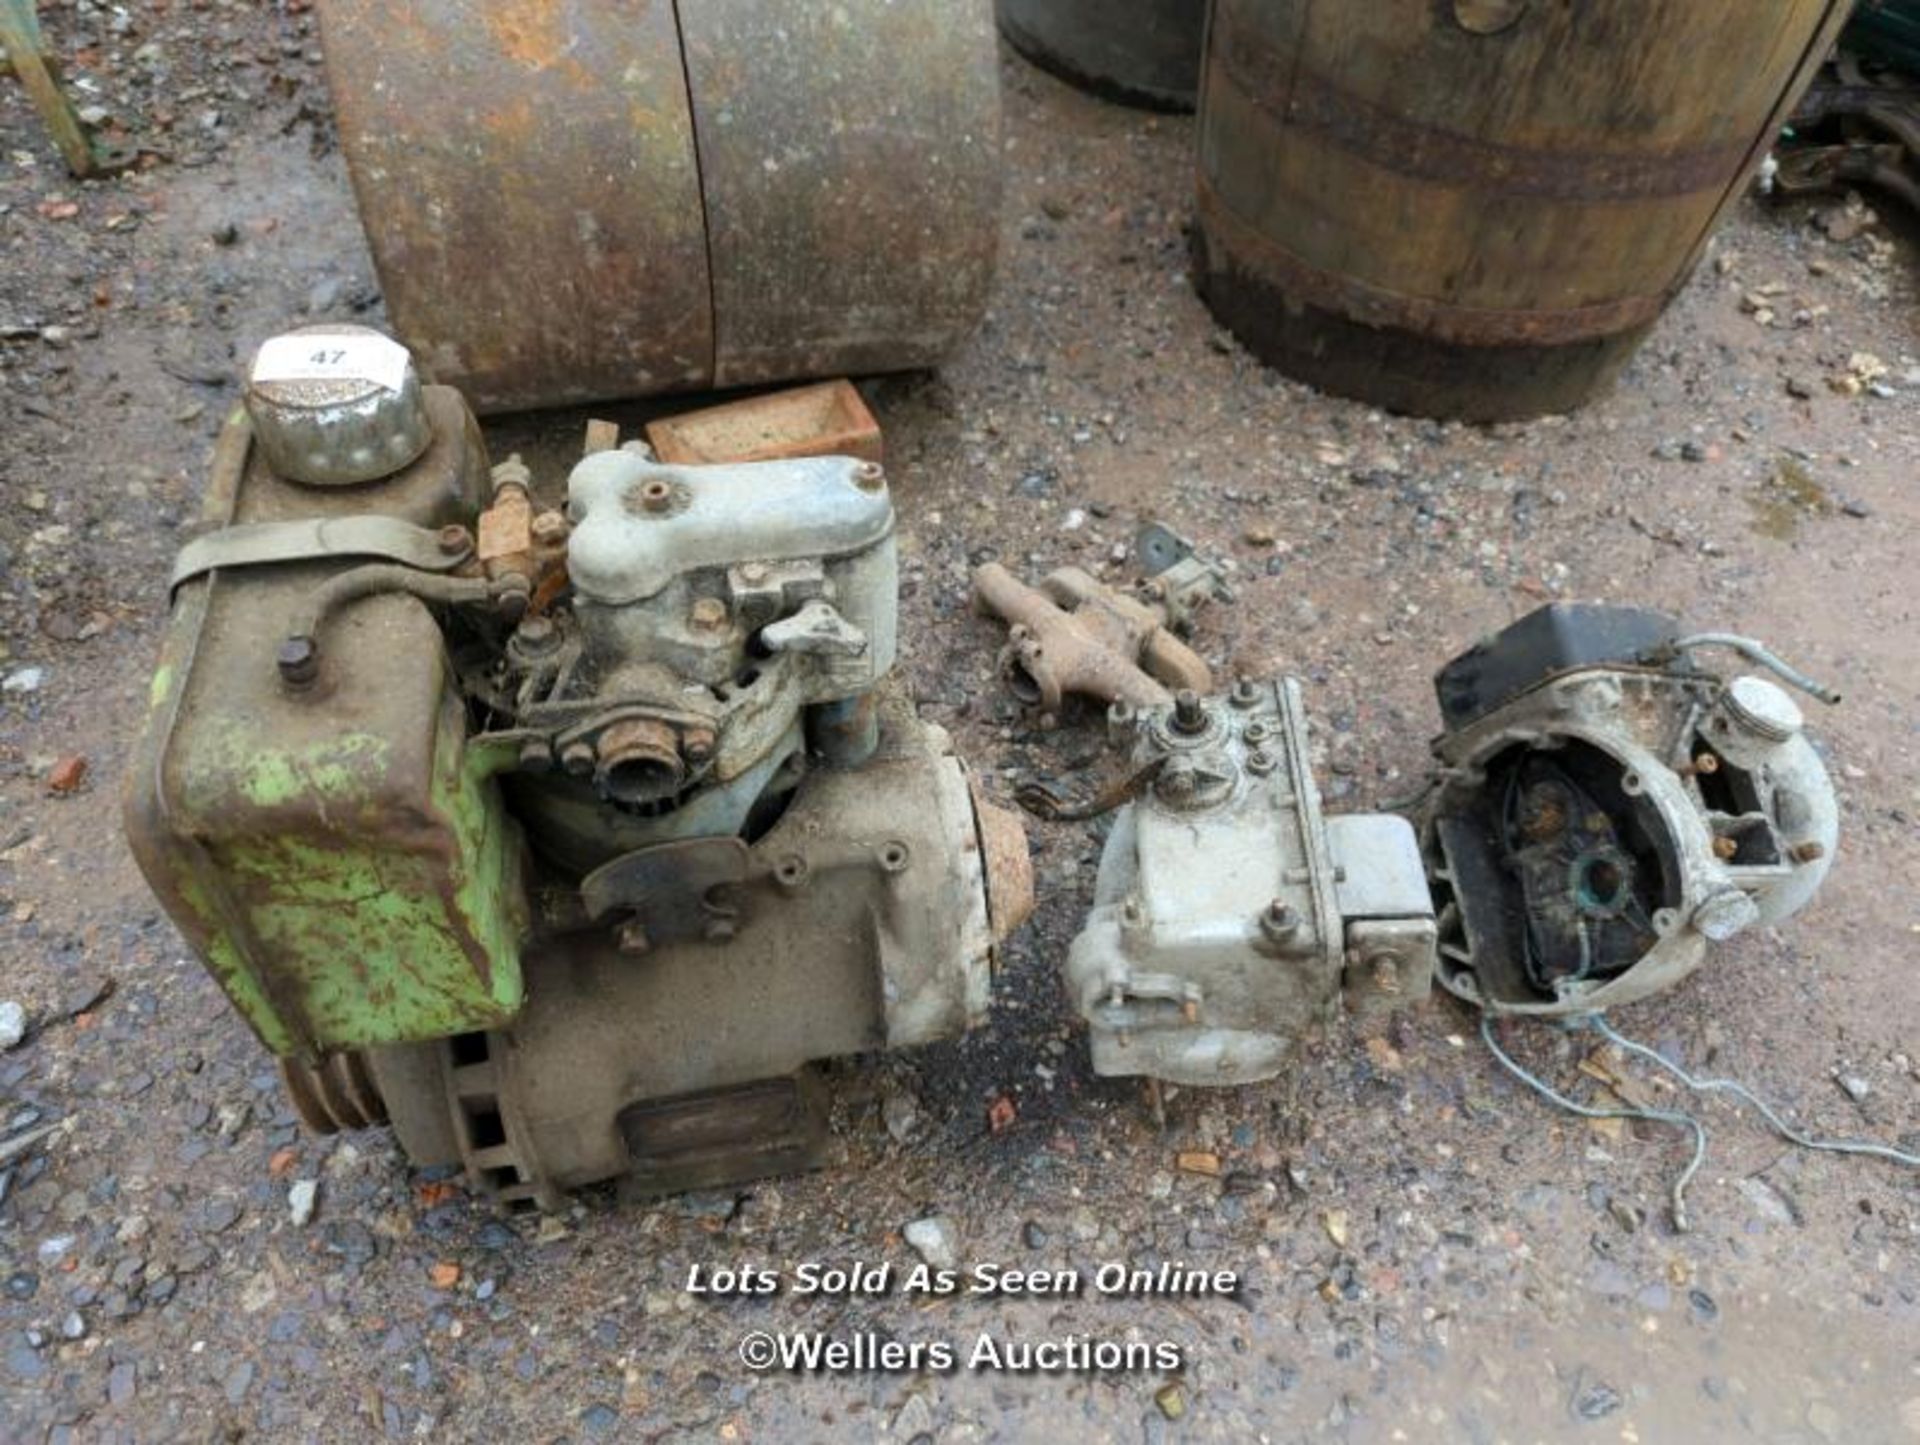 *COLLECTION OF ENGINES / ALL LOTS ARE LOCATED AT AUTHENTIC RECLAMATION TN5 7EF